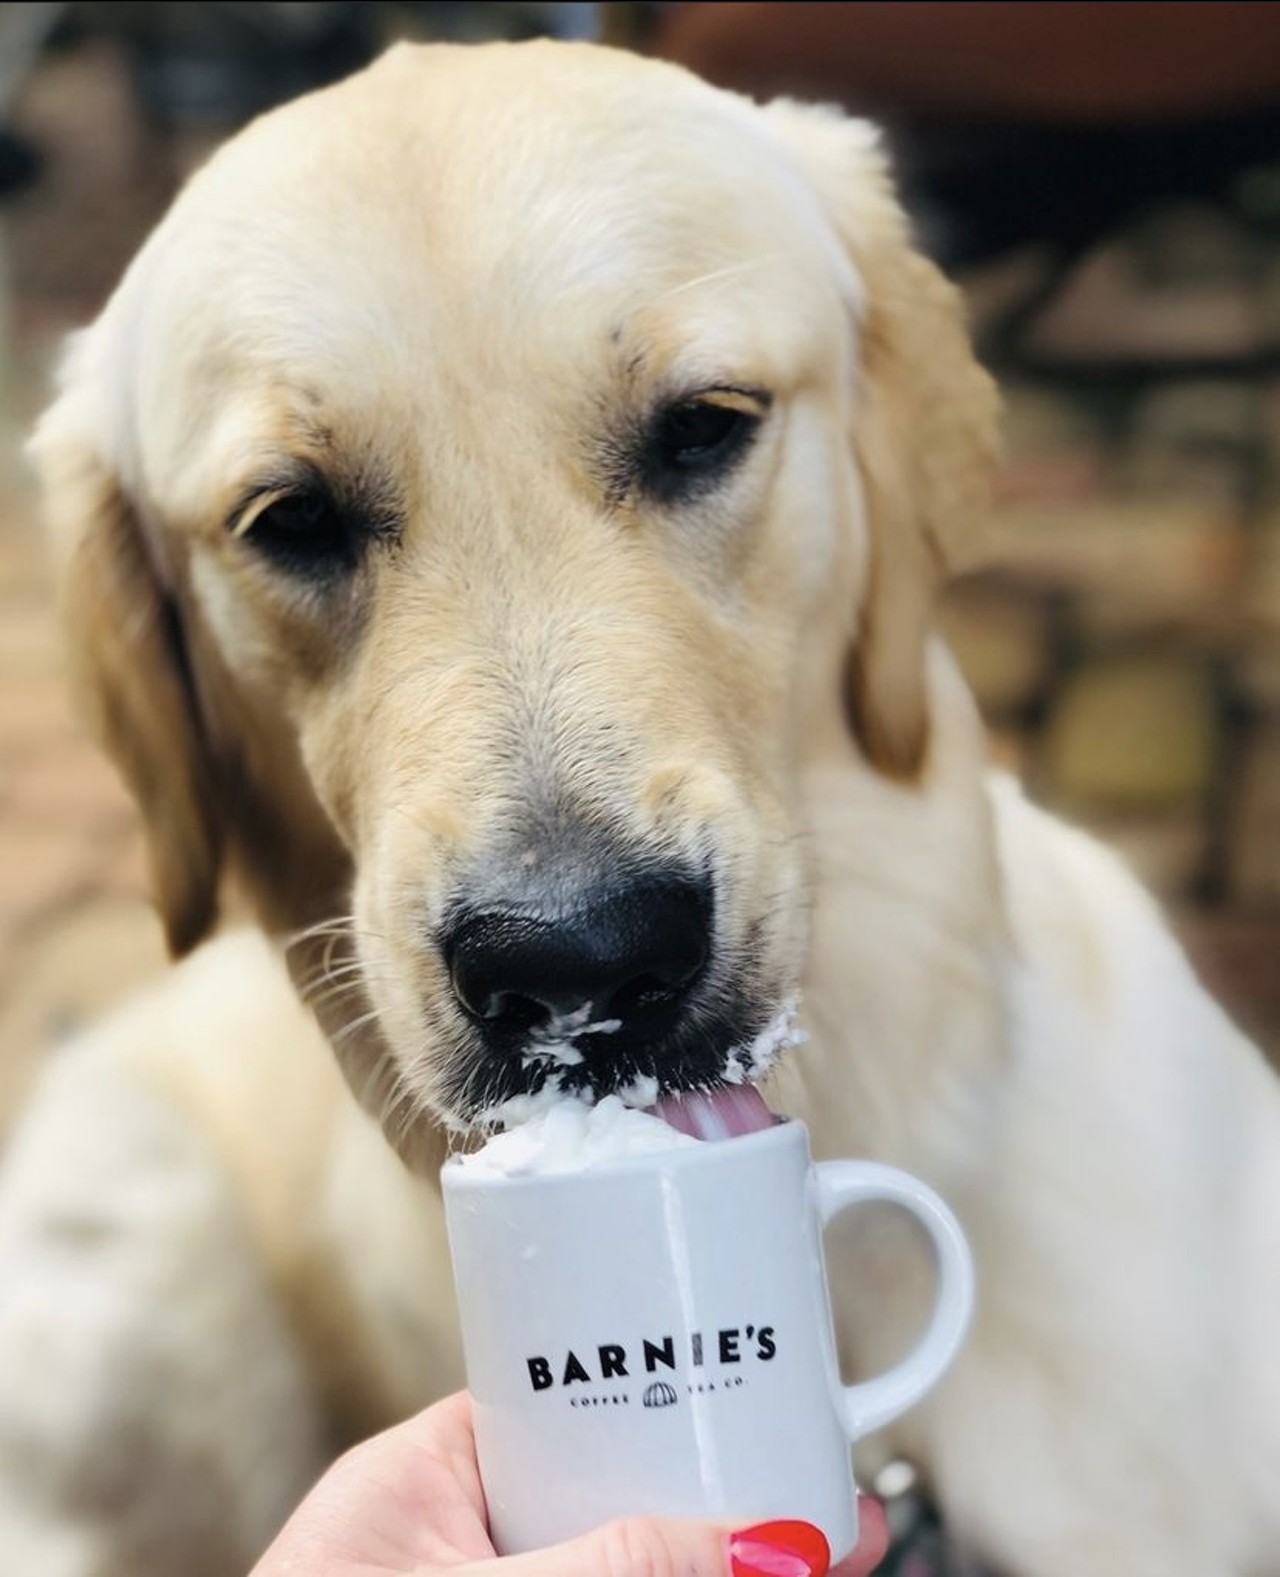 Bernie&#146;s Coffee & Tea 
118 S. Park Ave, Winter Park, FL 32789, (407) 629-0042
This is the place where you can have a coffee date with your puppy. They have a delicious selection of coffee, tea, and dogguccinos for your furry friends.
Photo via Bernie&#146;s Coffee & Tea/Instagram